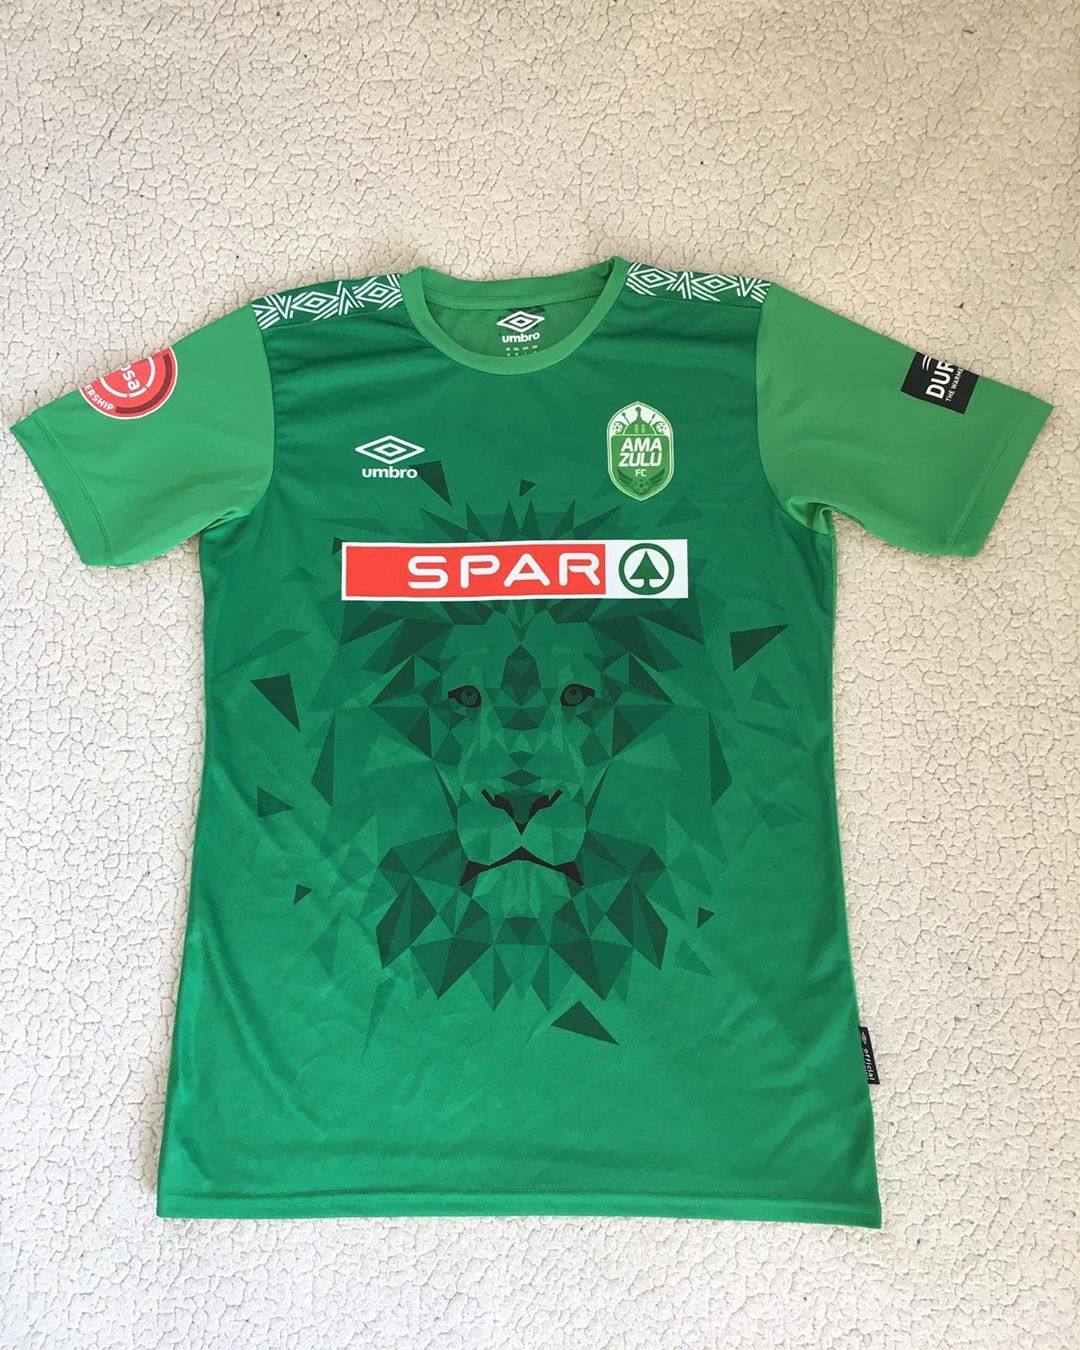 AmaZulu F.C. Home 2019/2020 Football Shirt Manufactured By Umbro. The club plays football in South Africa.